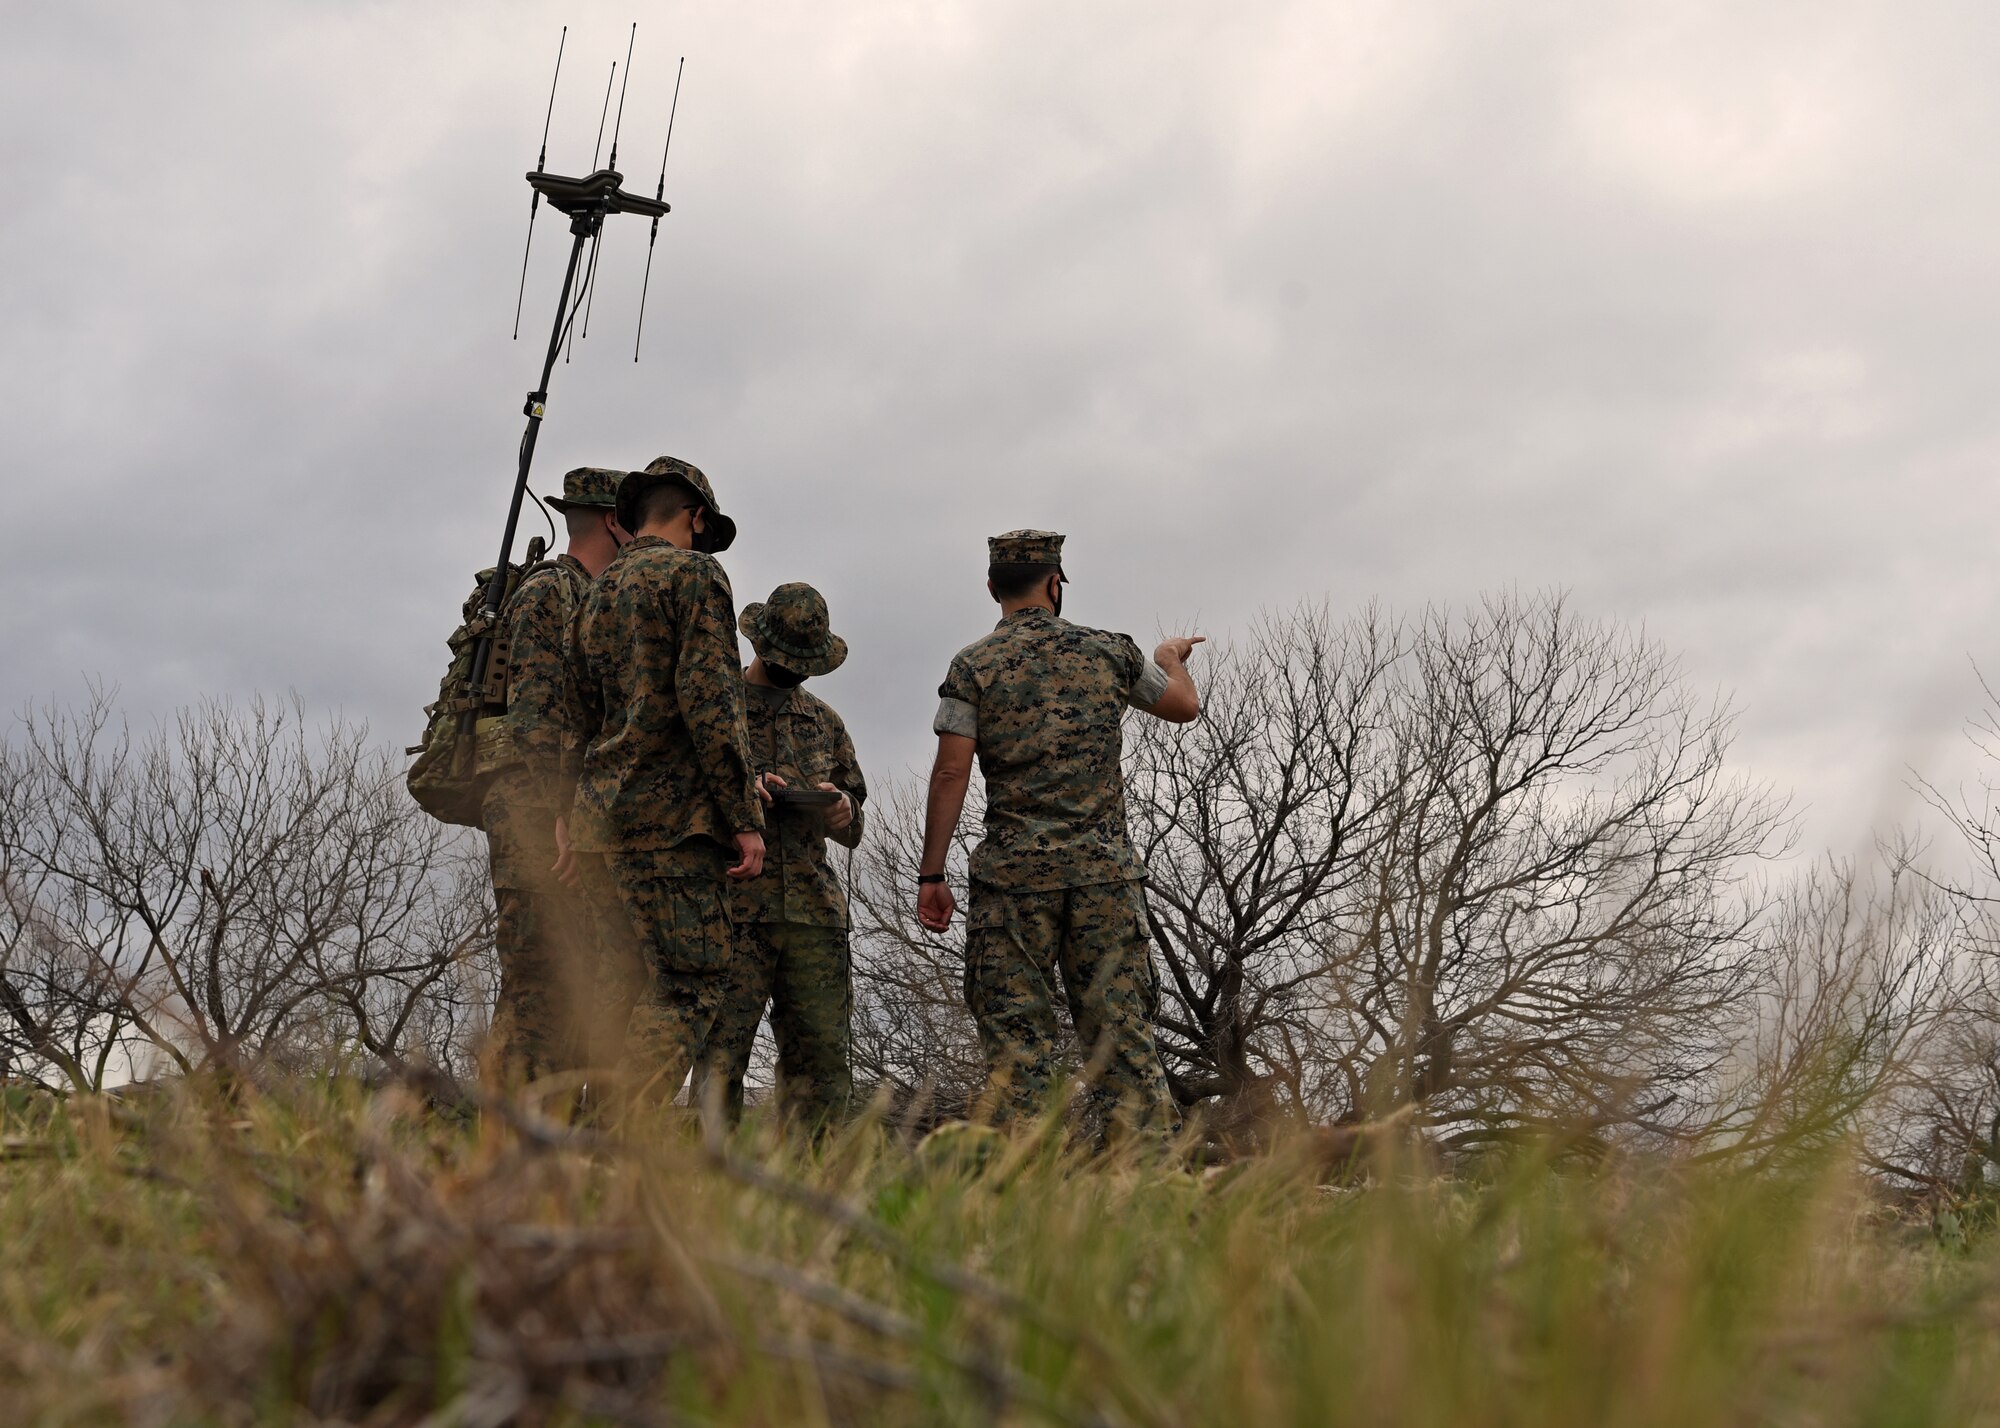 U.S. Marine Corps Gunnery Sgt. Zachary Fulk, Marine Corps Detachment Tactical Signals Intelligence Operator course instructor, offers insight and recommends new techniques for the TSOC students, who are locating an enemy signal emitter with their versatile radio observation and direction finder during a field exercise outside of the MCD dormitories on Goodfellow Air Force Base, Texas, March 22, 2021. Fulk and other MCD instructors were trained to challenge their students in order to promote educational attainment and expand warfighting readiness. (U.S. Air Force photo by Senior Airman Abbey Rieves)